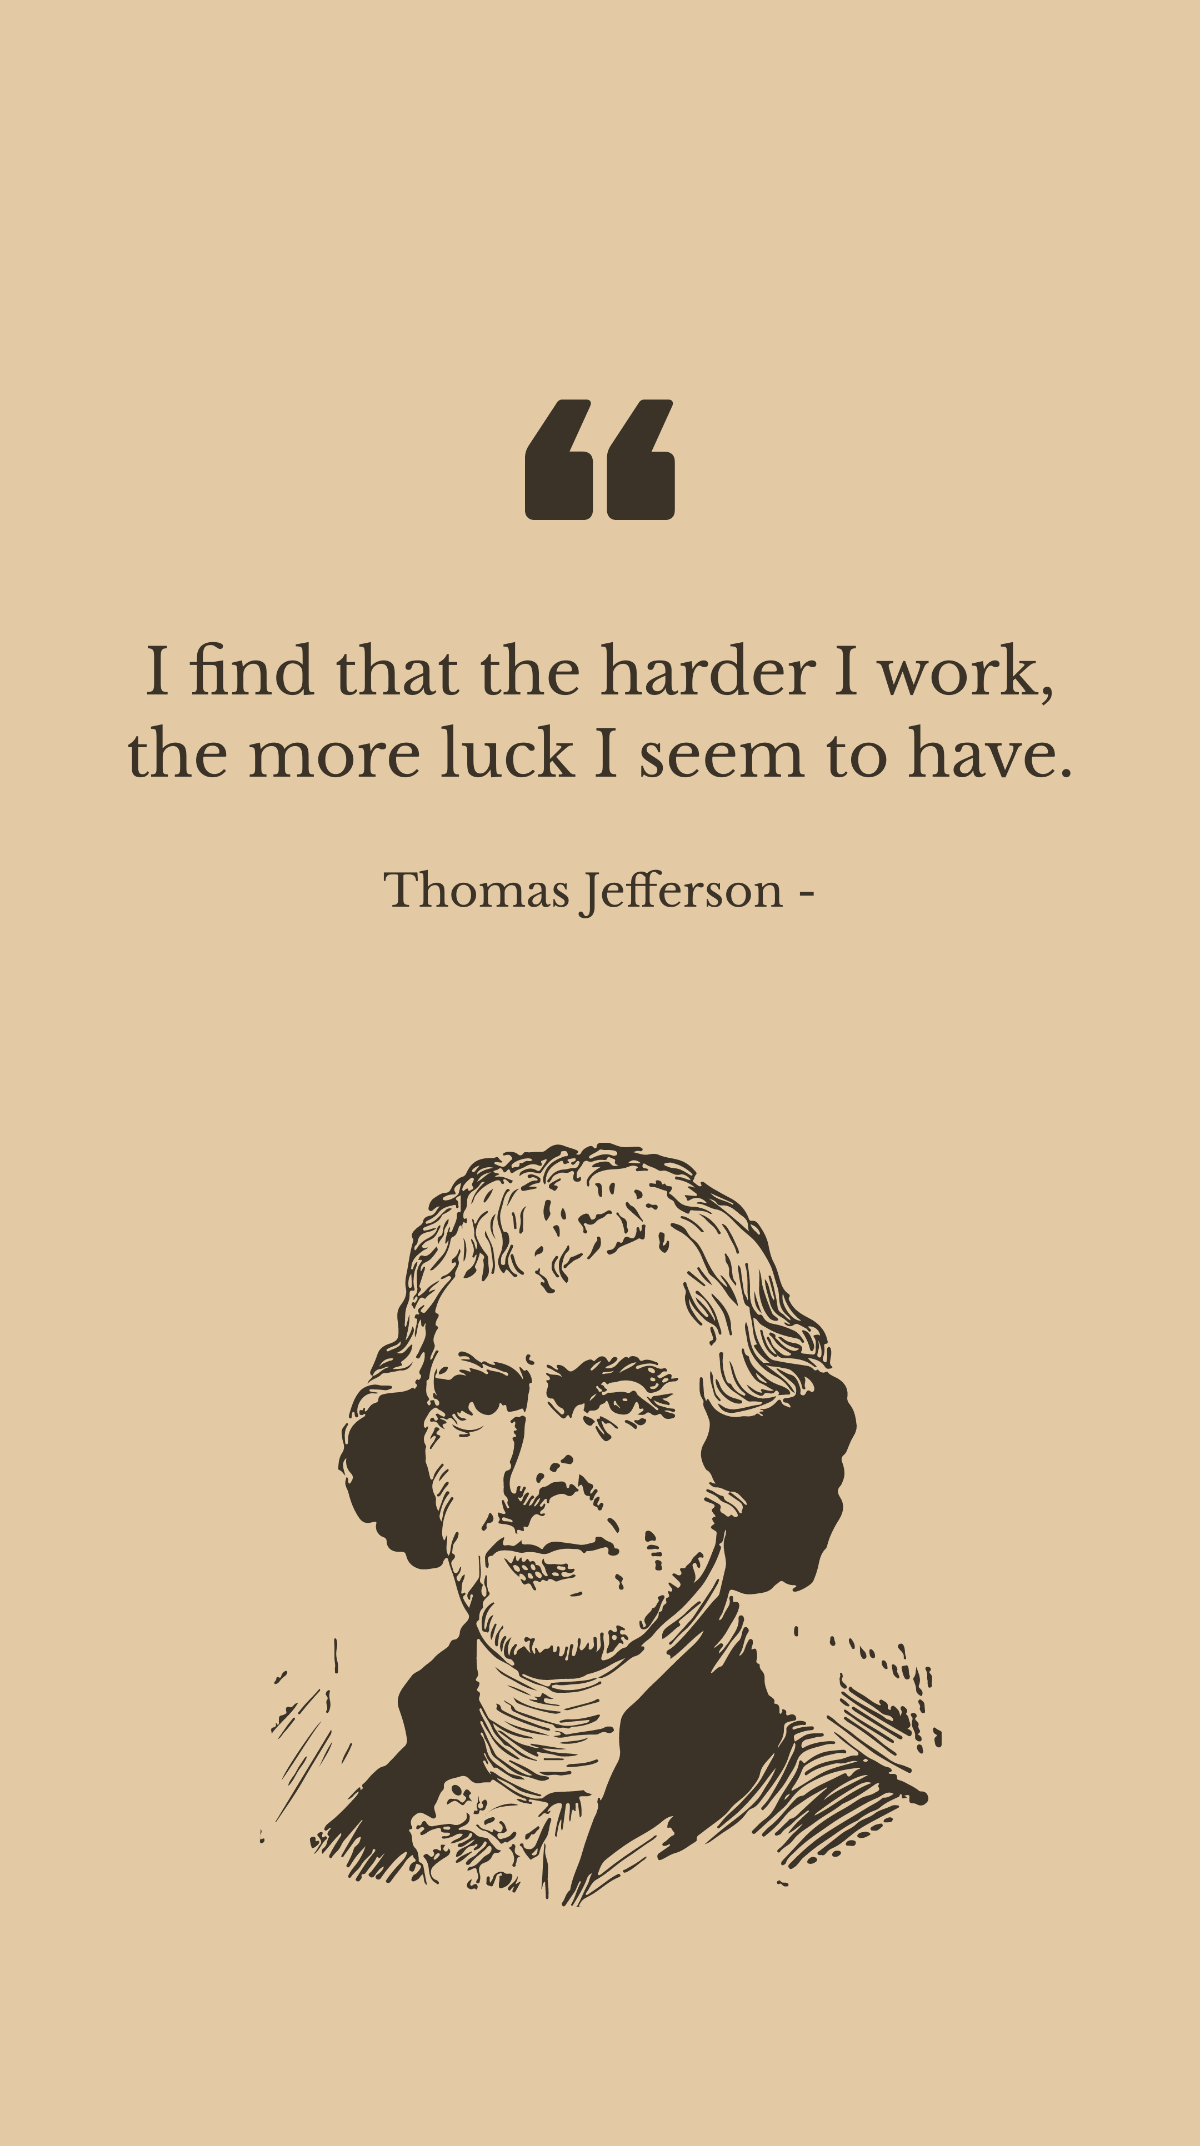 Free Thomas Jefferson - I find that the harder I work, the more luck I seem to have. Template